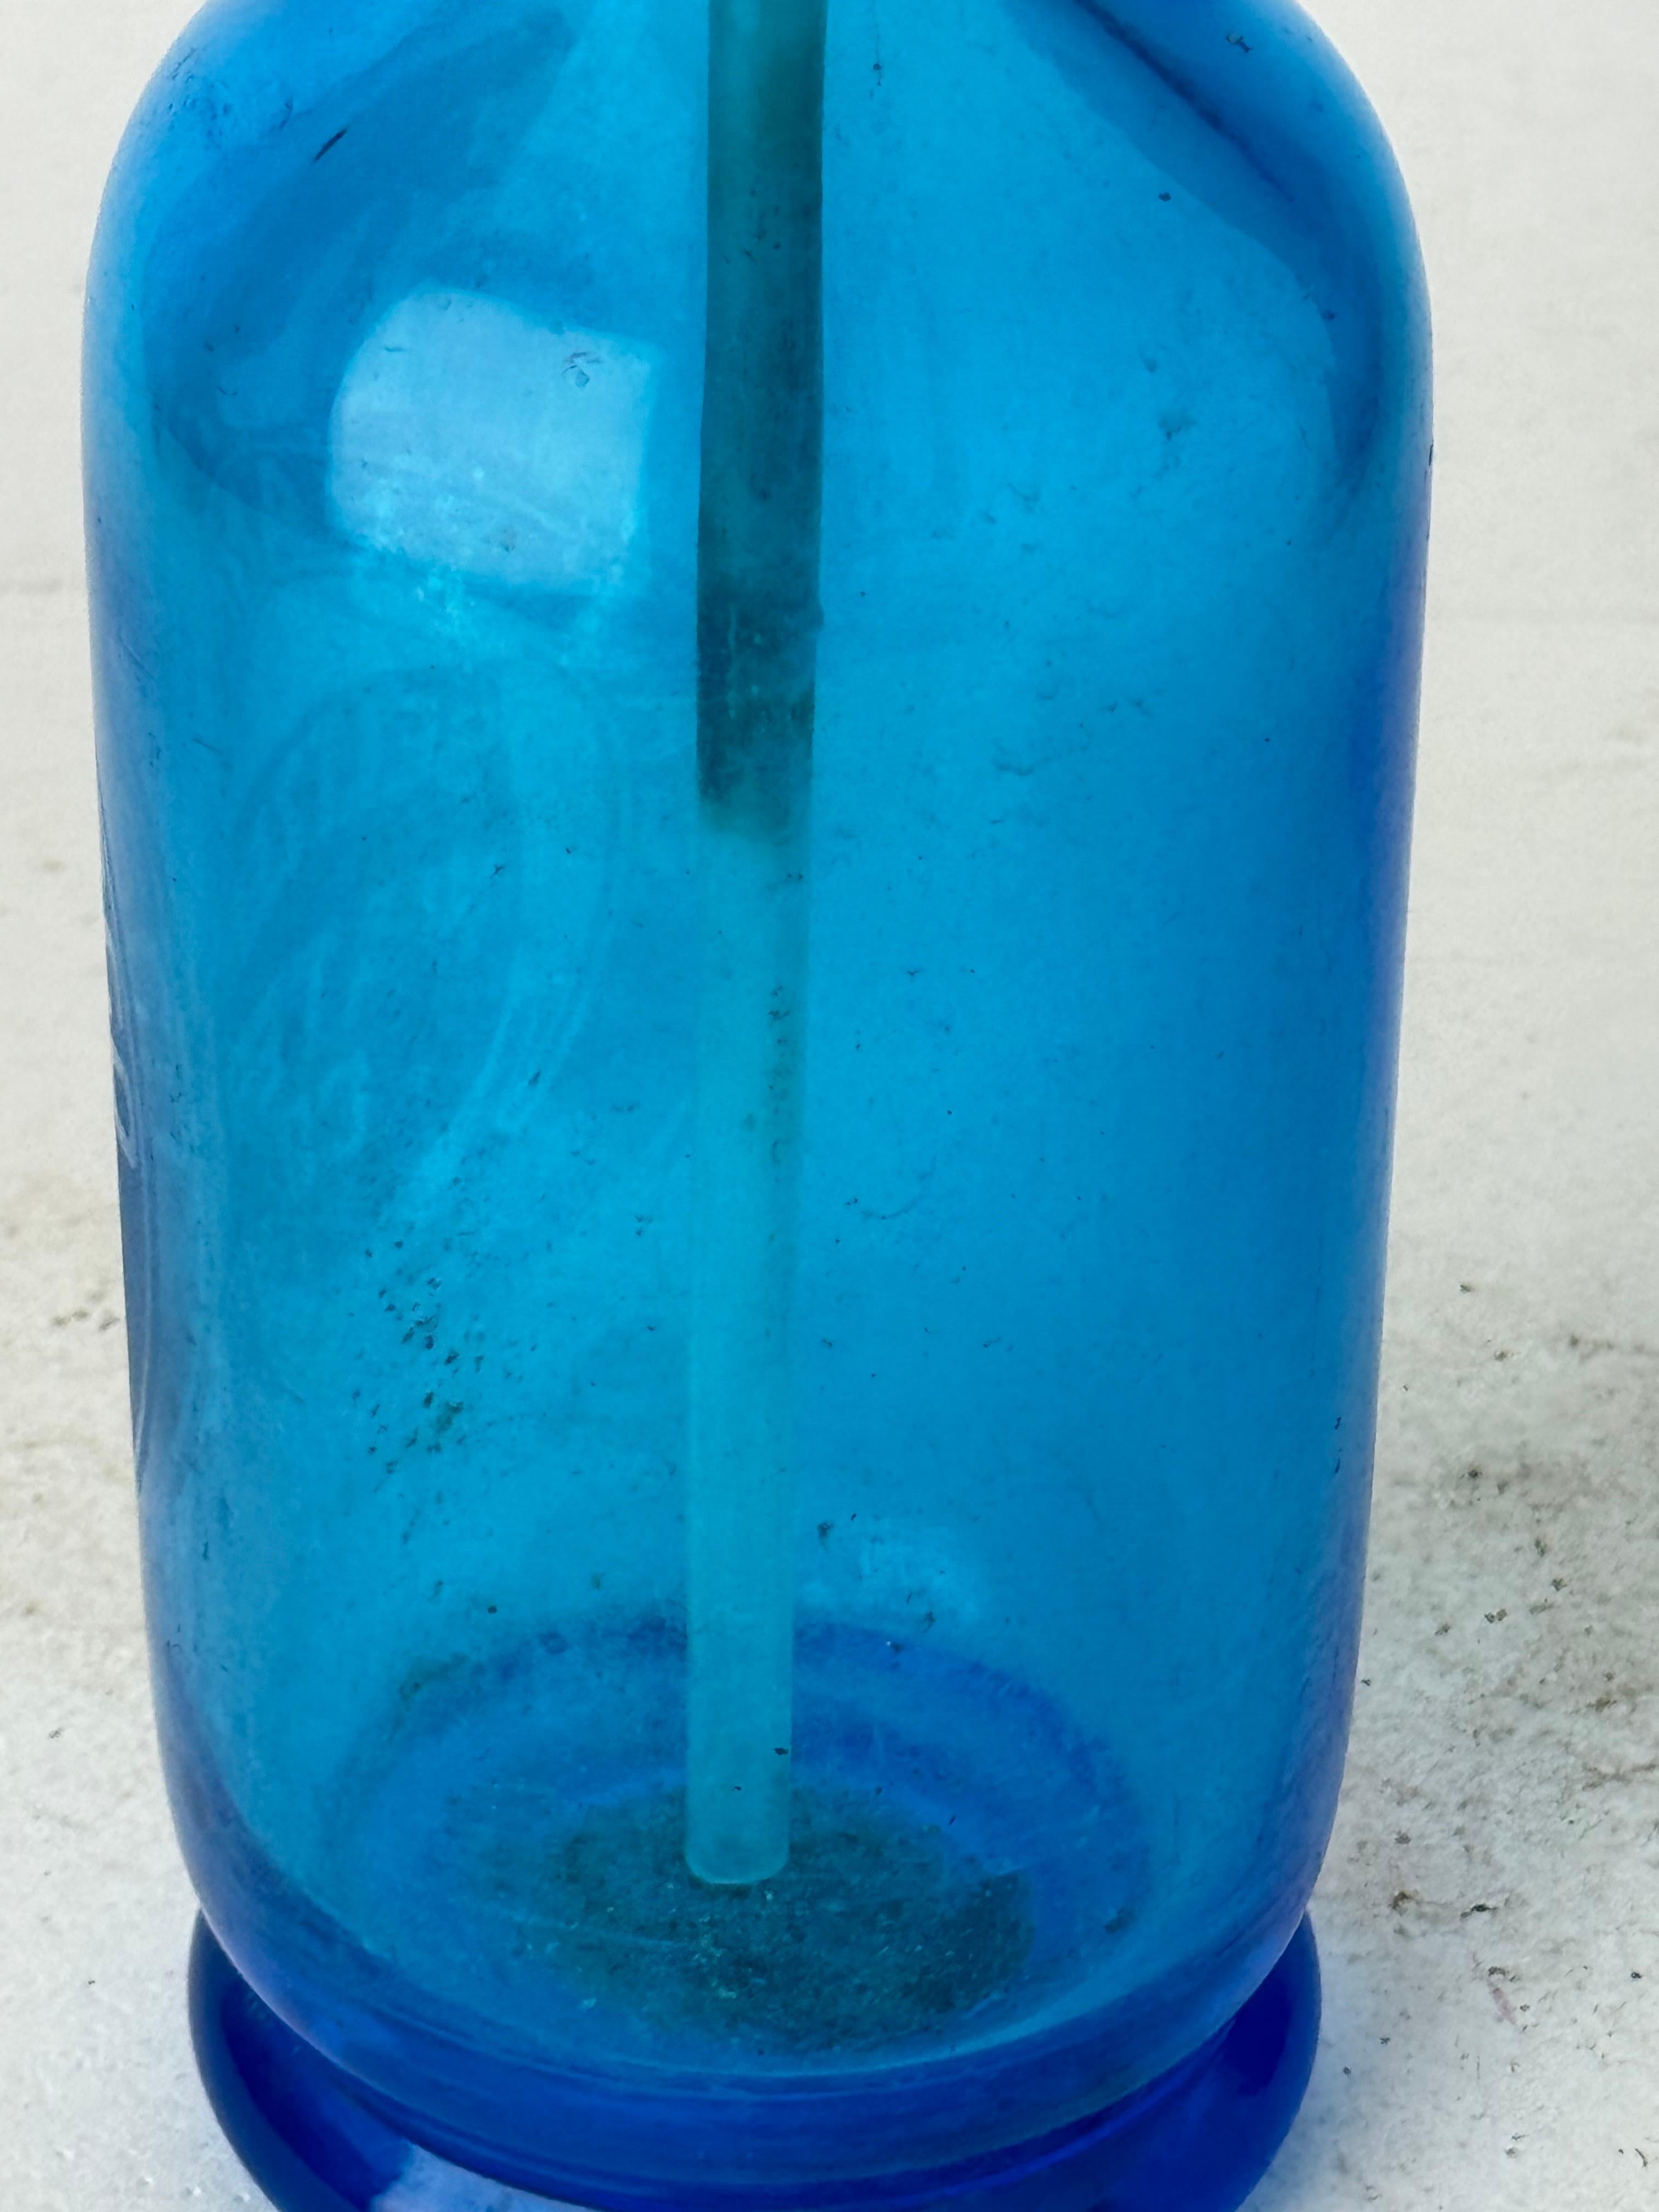 Antique San Francisco Seltzer Water Co. Blue Glass Seltzer Bottle  In Good Condition For Sale In San Carlos, CA